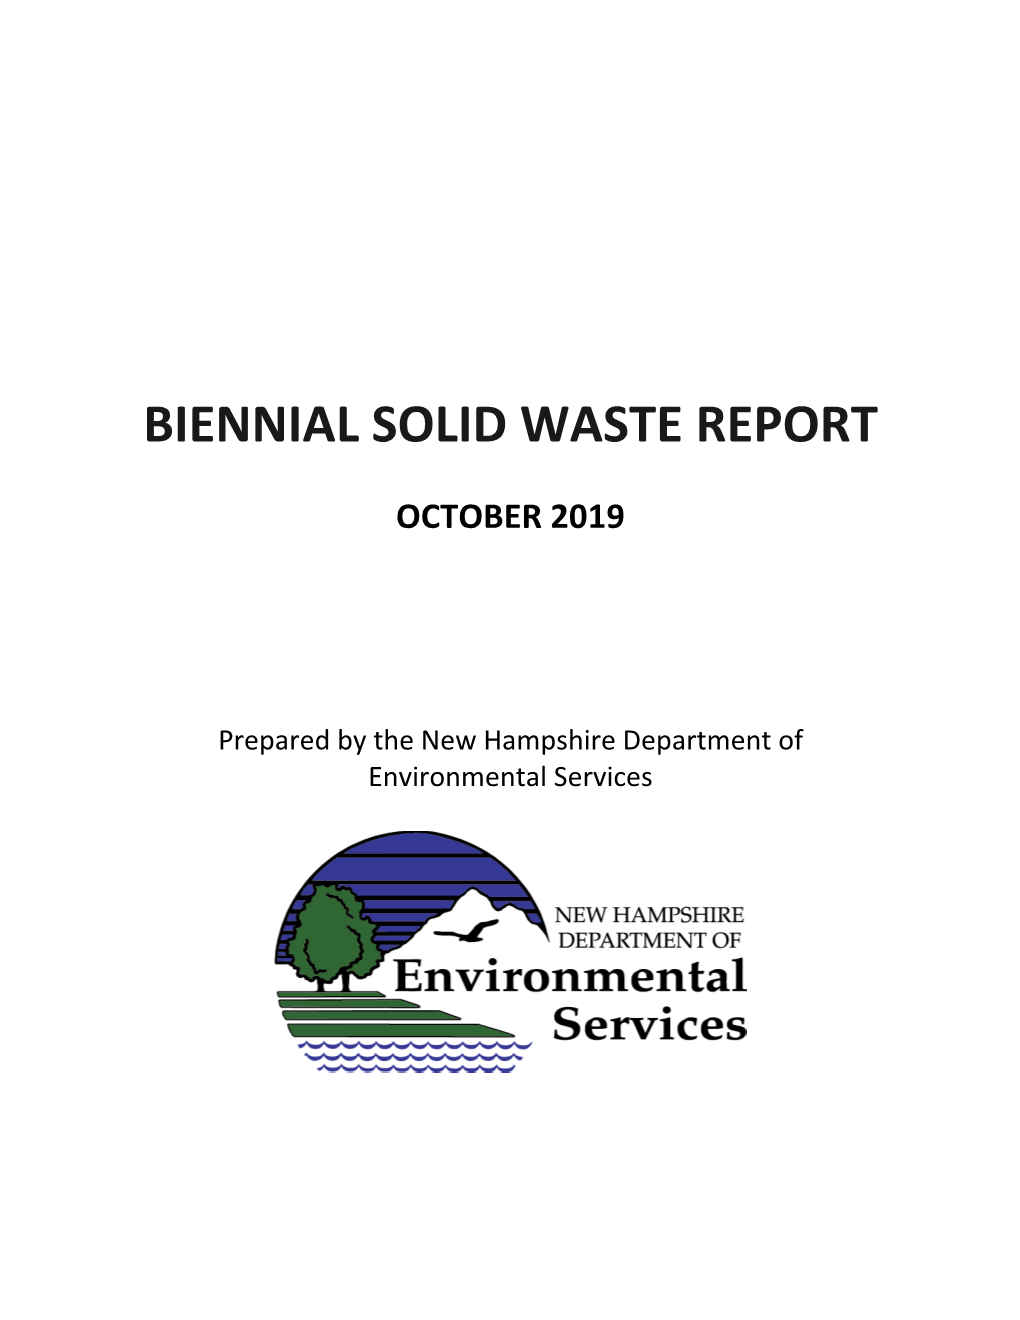 Read the 2019 Biennial Solid Waste Report .Pdf